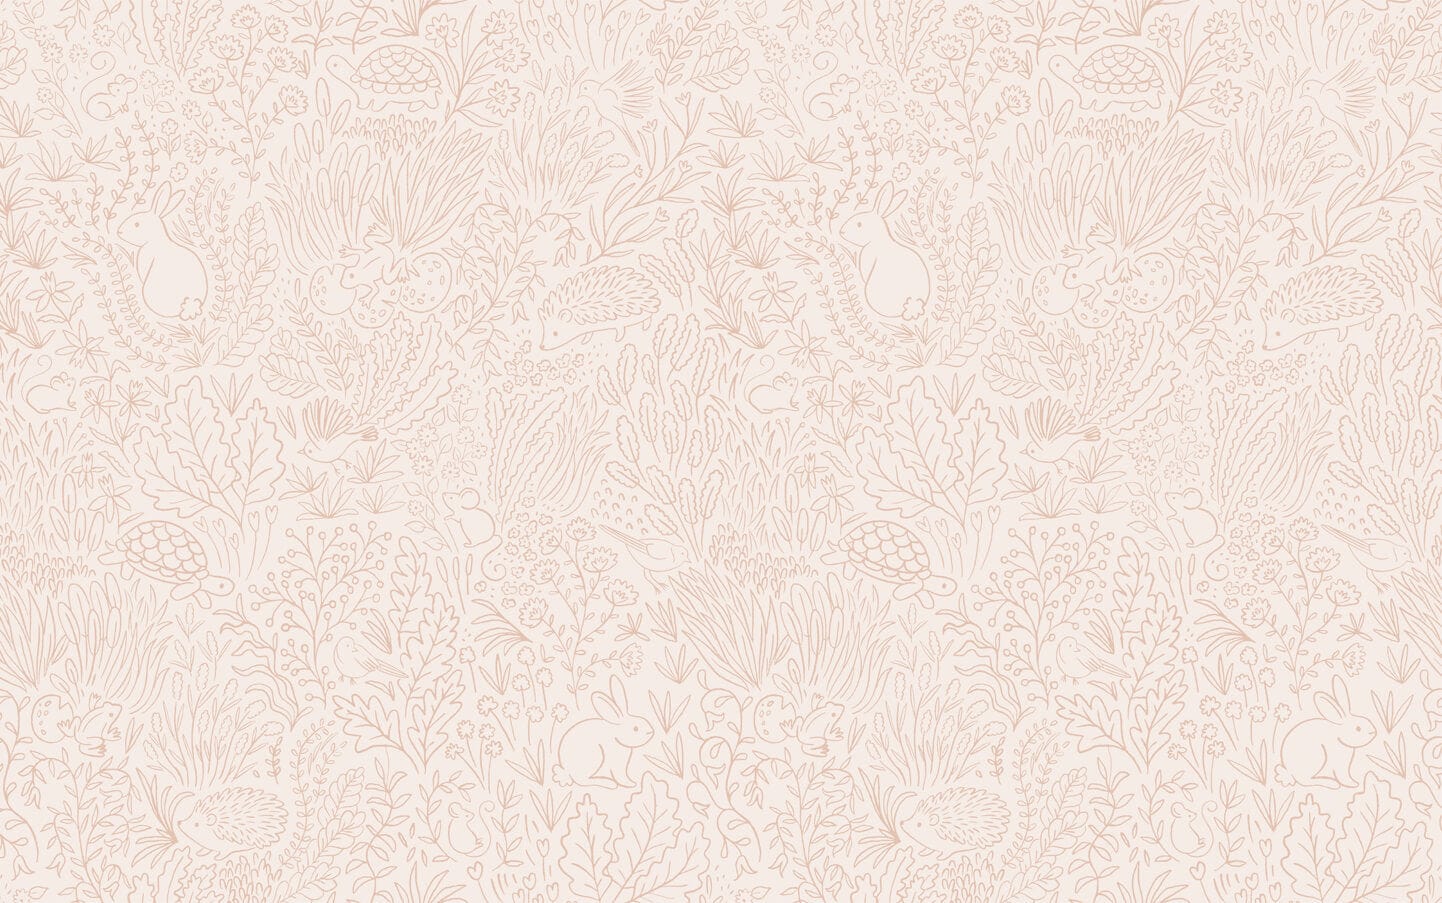 Wallpaper of Orange line work animals and florals such as rabbits, hedgehogs, frogs, tortoise, mice and birds.